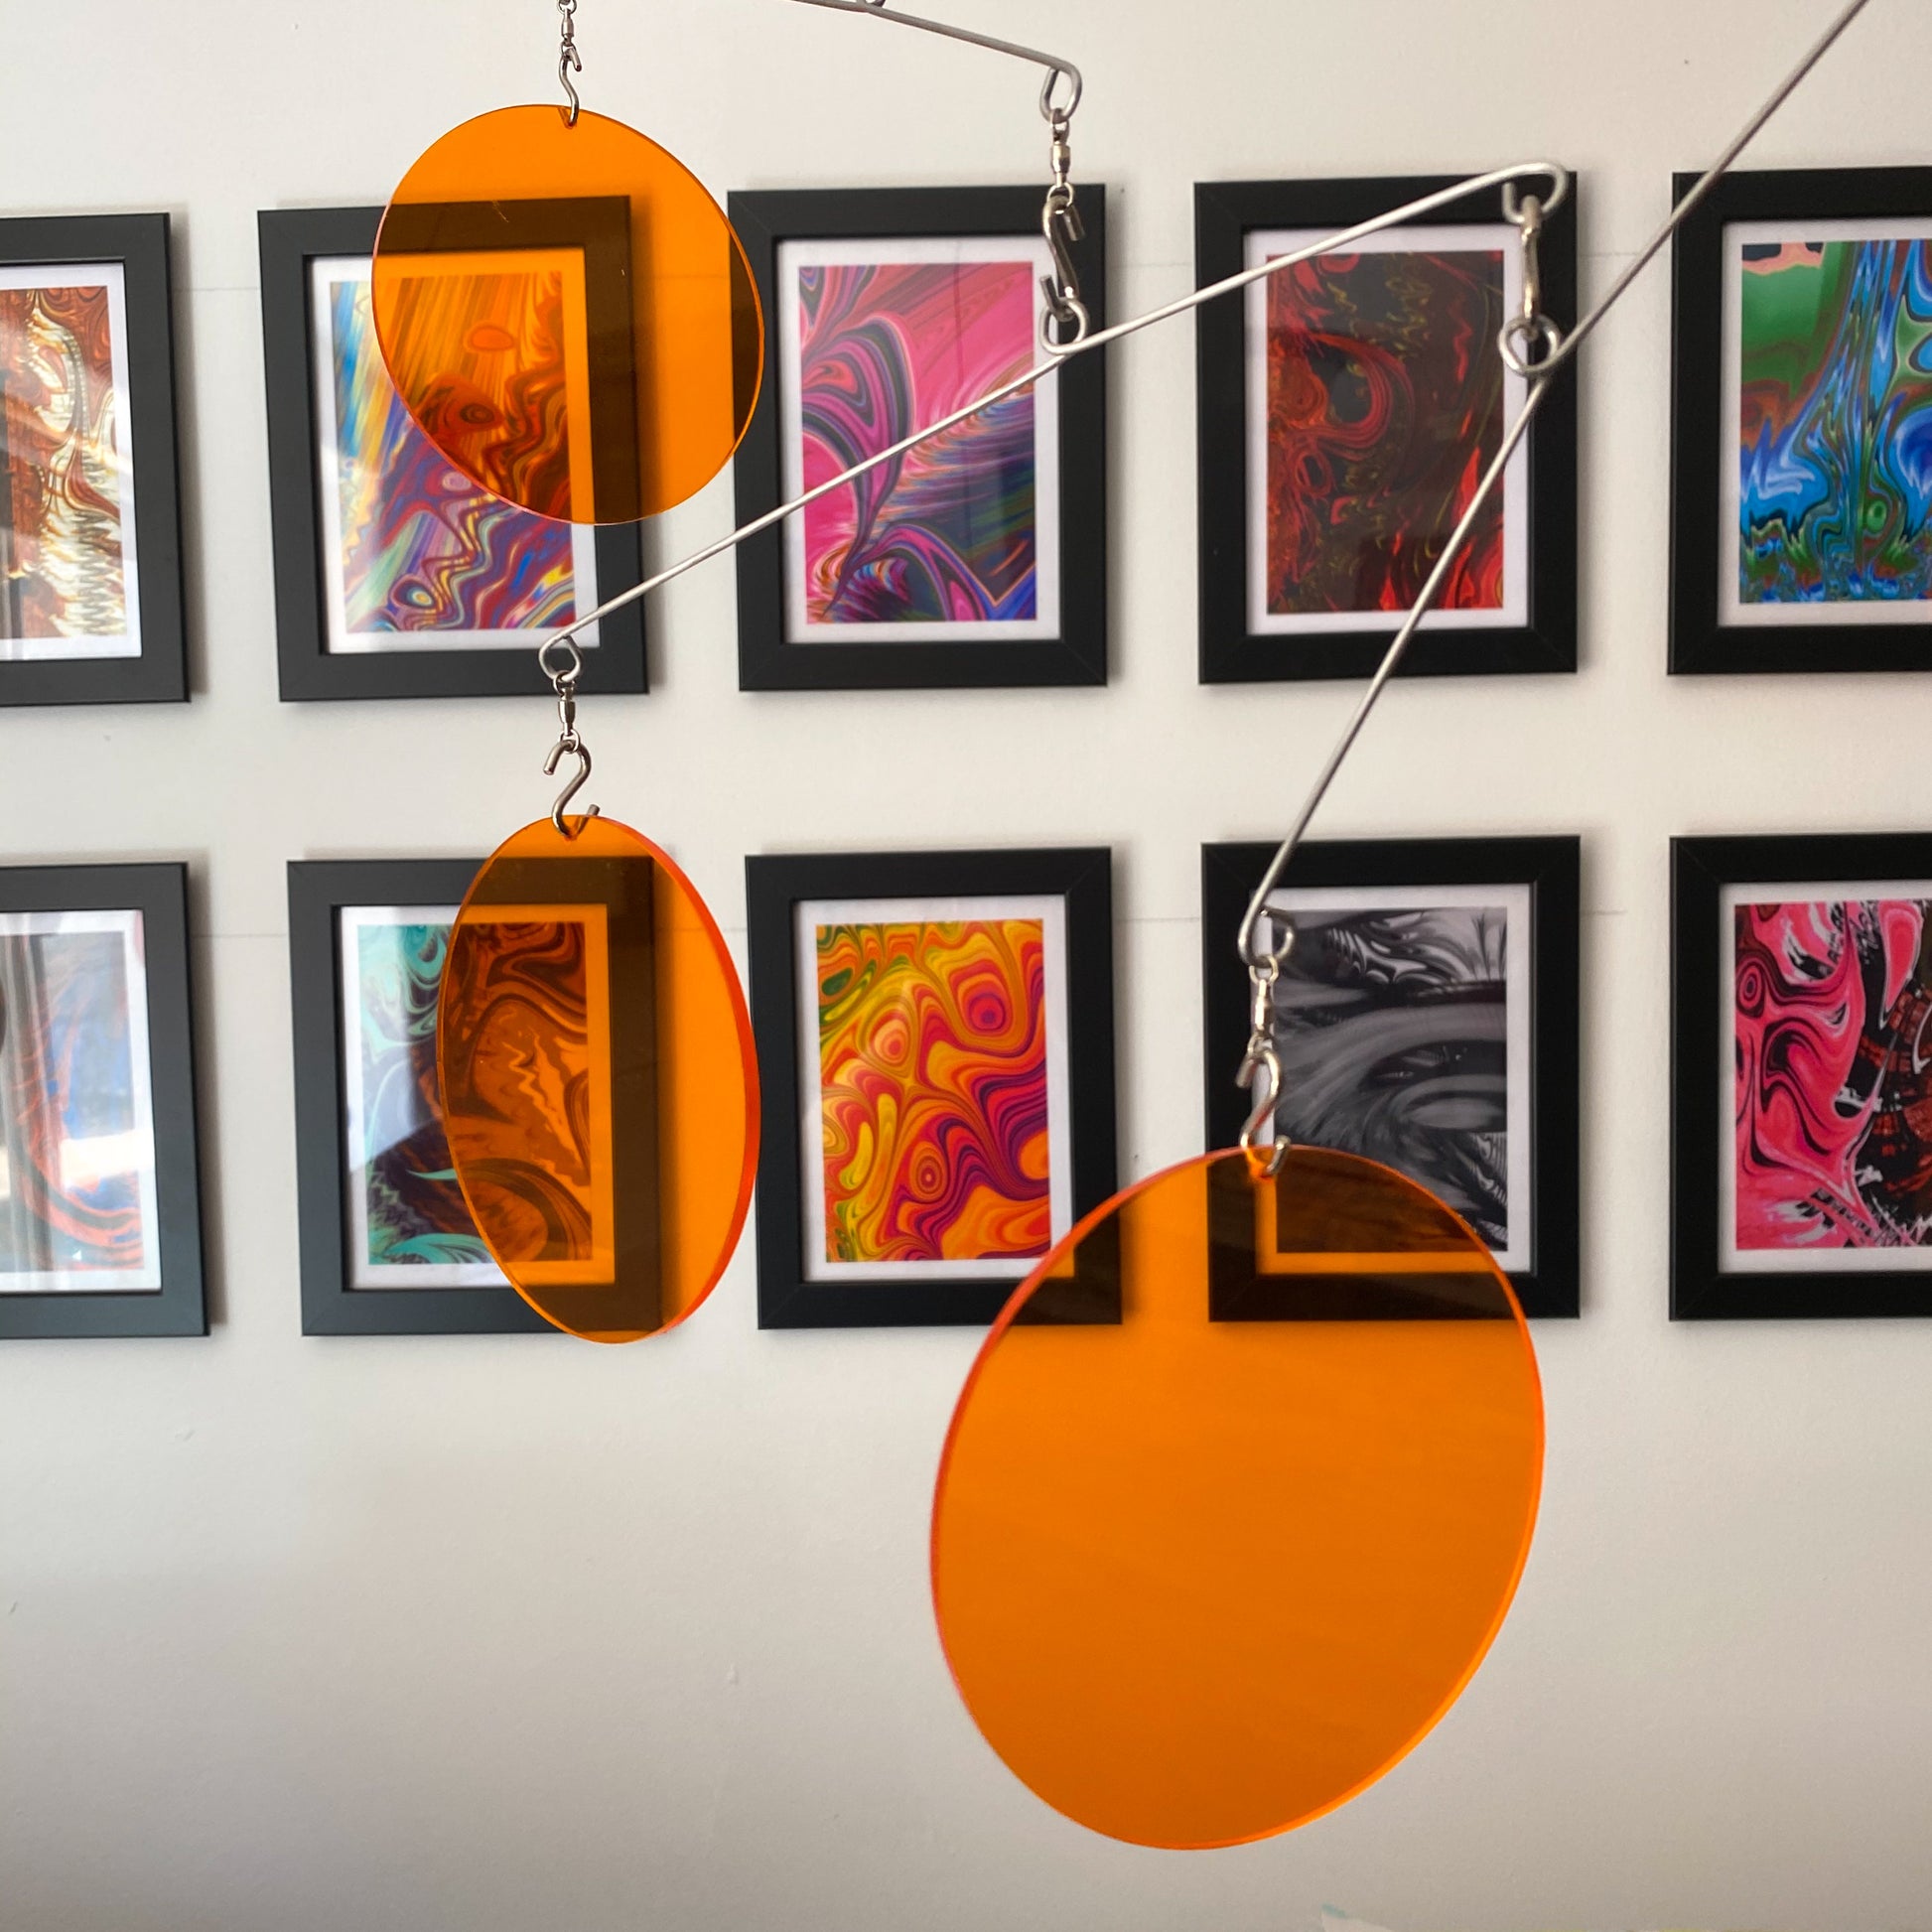 Clear Orange Acrylic Atomic Mobiles in front of MiniMOD abstract colorful art prints by AtomicMobiles.com